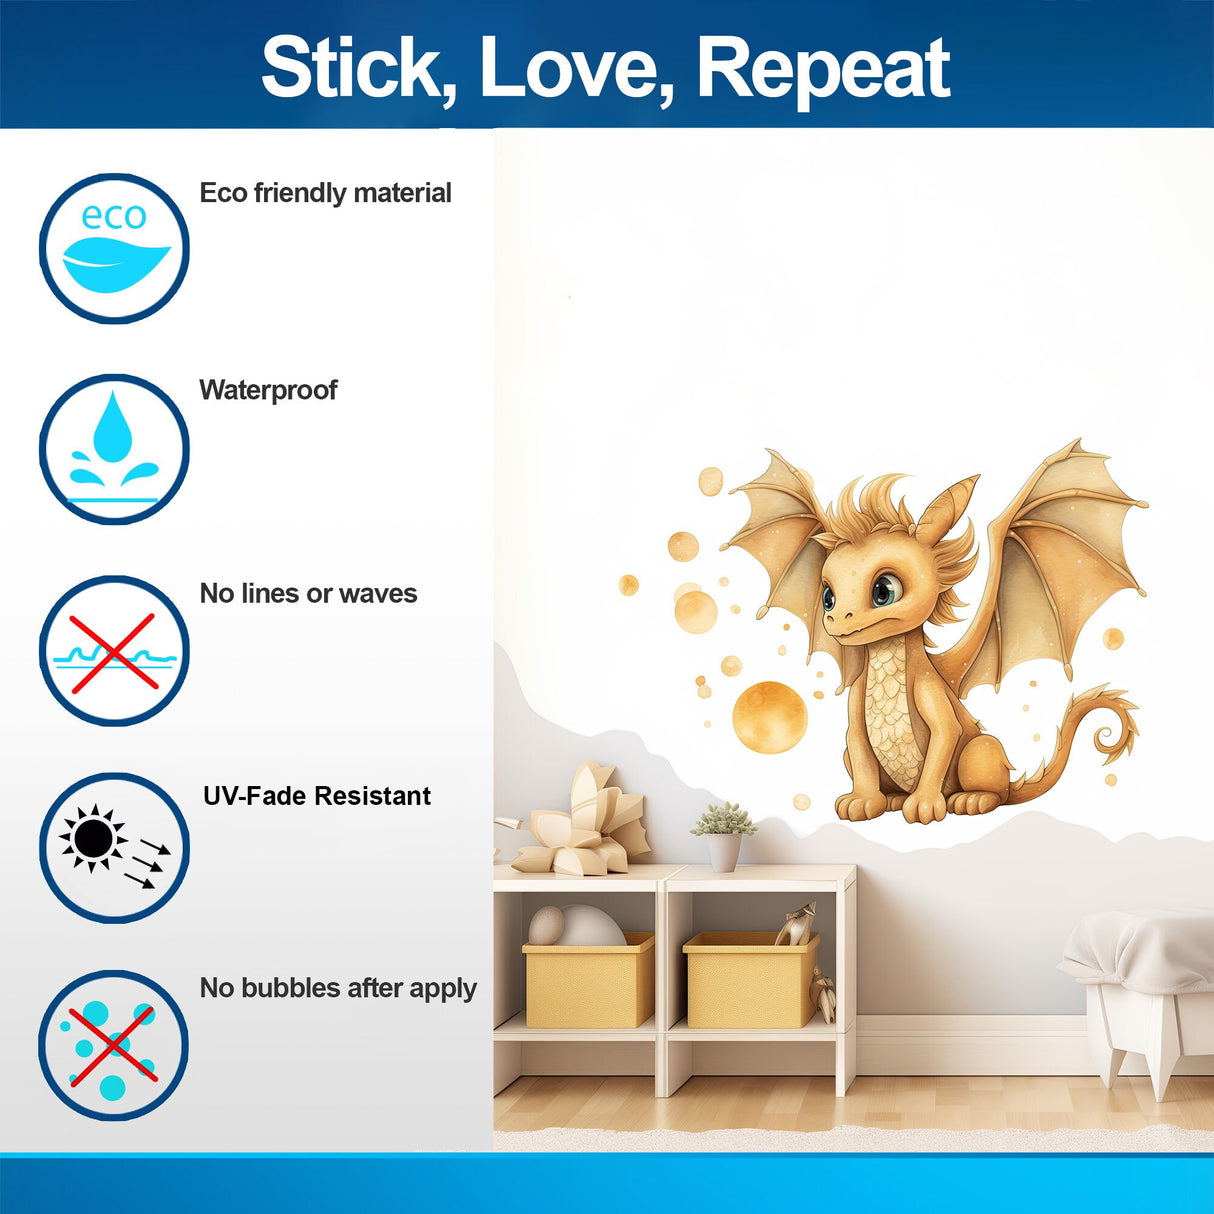 Enchanted Gold Dragon Wall Decal - Whimsical Baby Dragon Sticker Mural